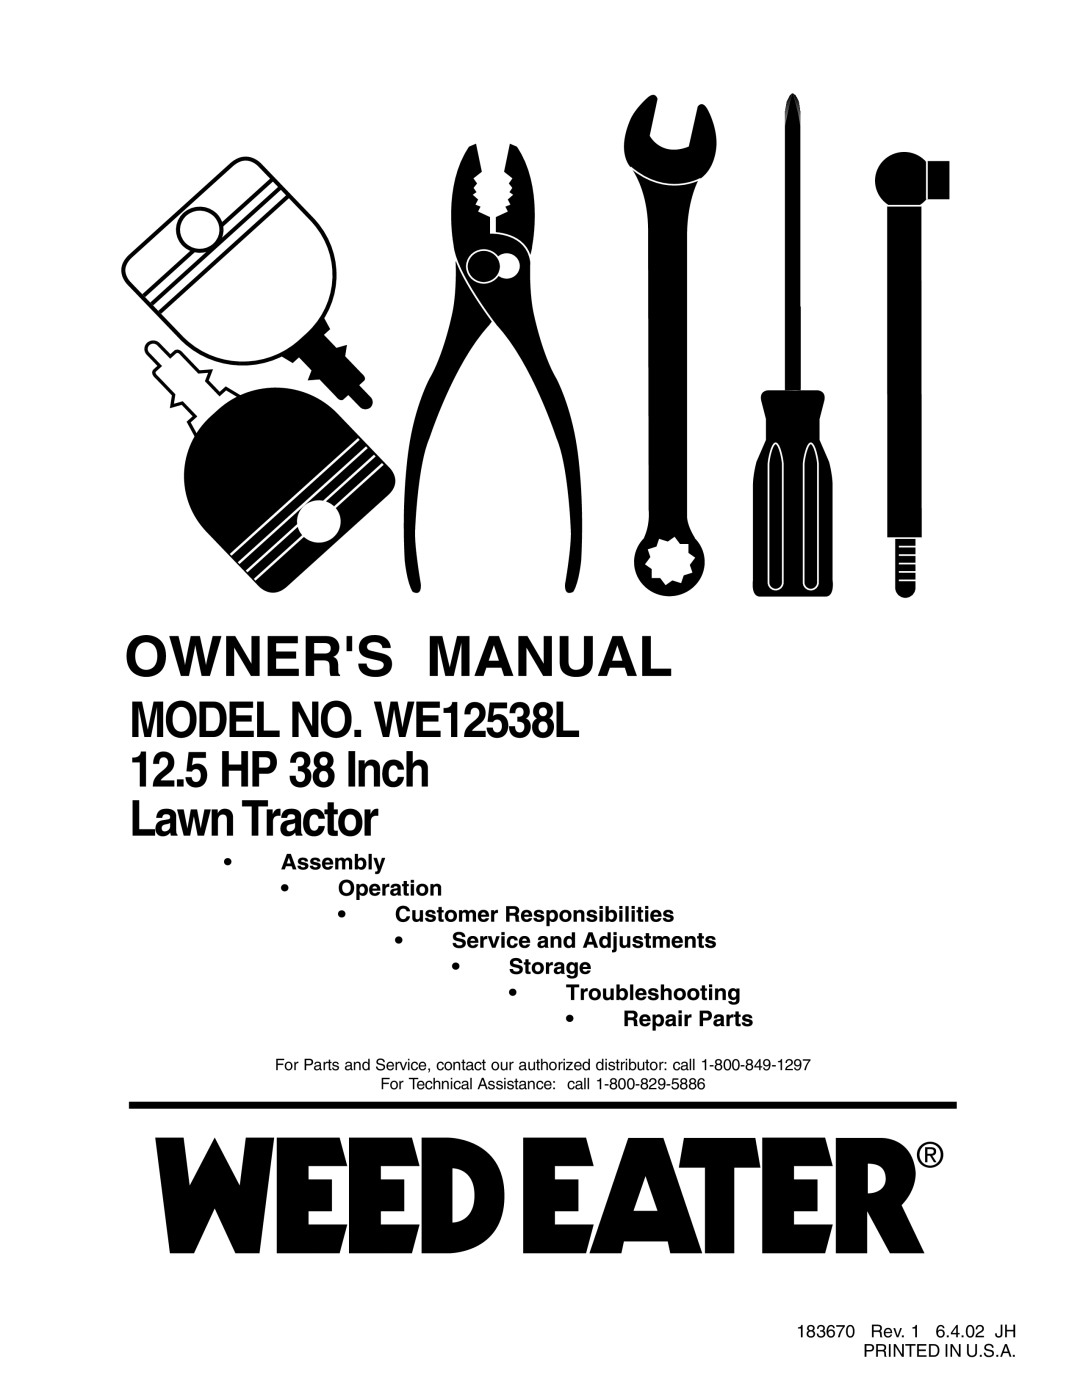 Weed Eater manual MODEL NO. WE12538L 12.5 HP 38 Inch Lawn Tractor, 183670 Rev. 1 6.4.02 JH PRINTED IN U.S.A 